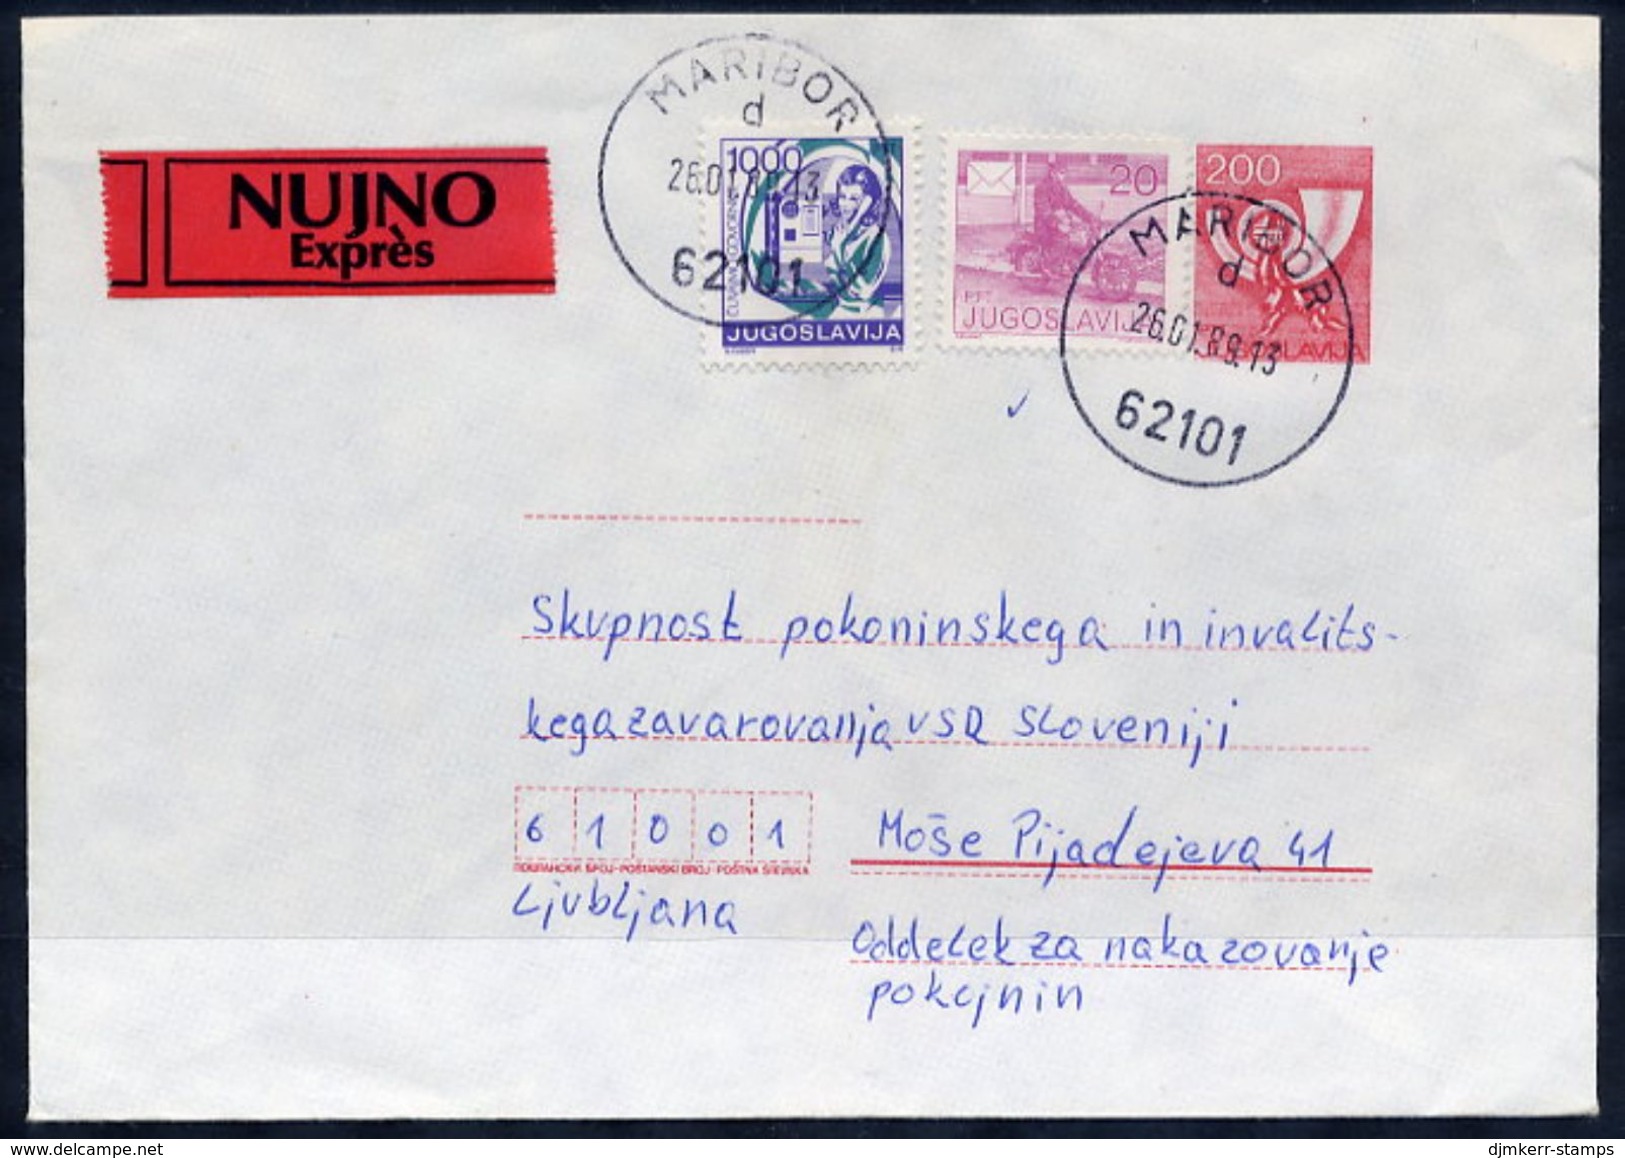 YUGOSLAVIA 1988 Posthorn 200 D.stationery Envelope With  Used With Additional Franking And Express Label.  Michel U82 - Postal Stationery